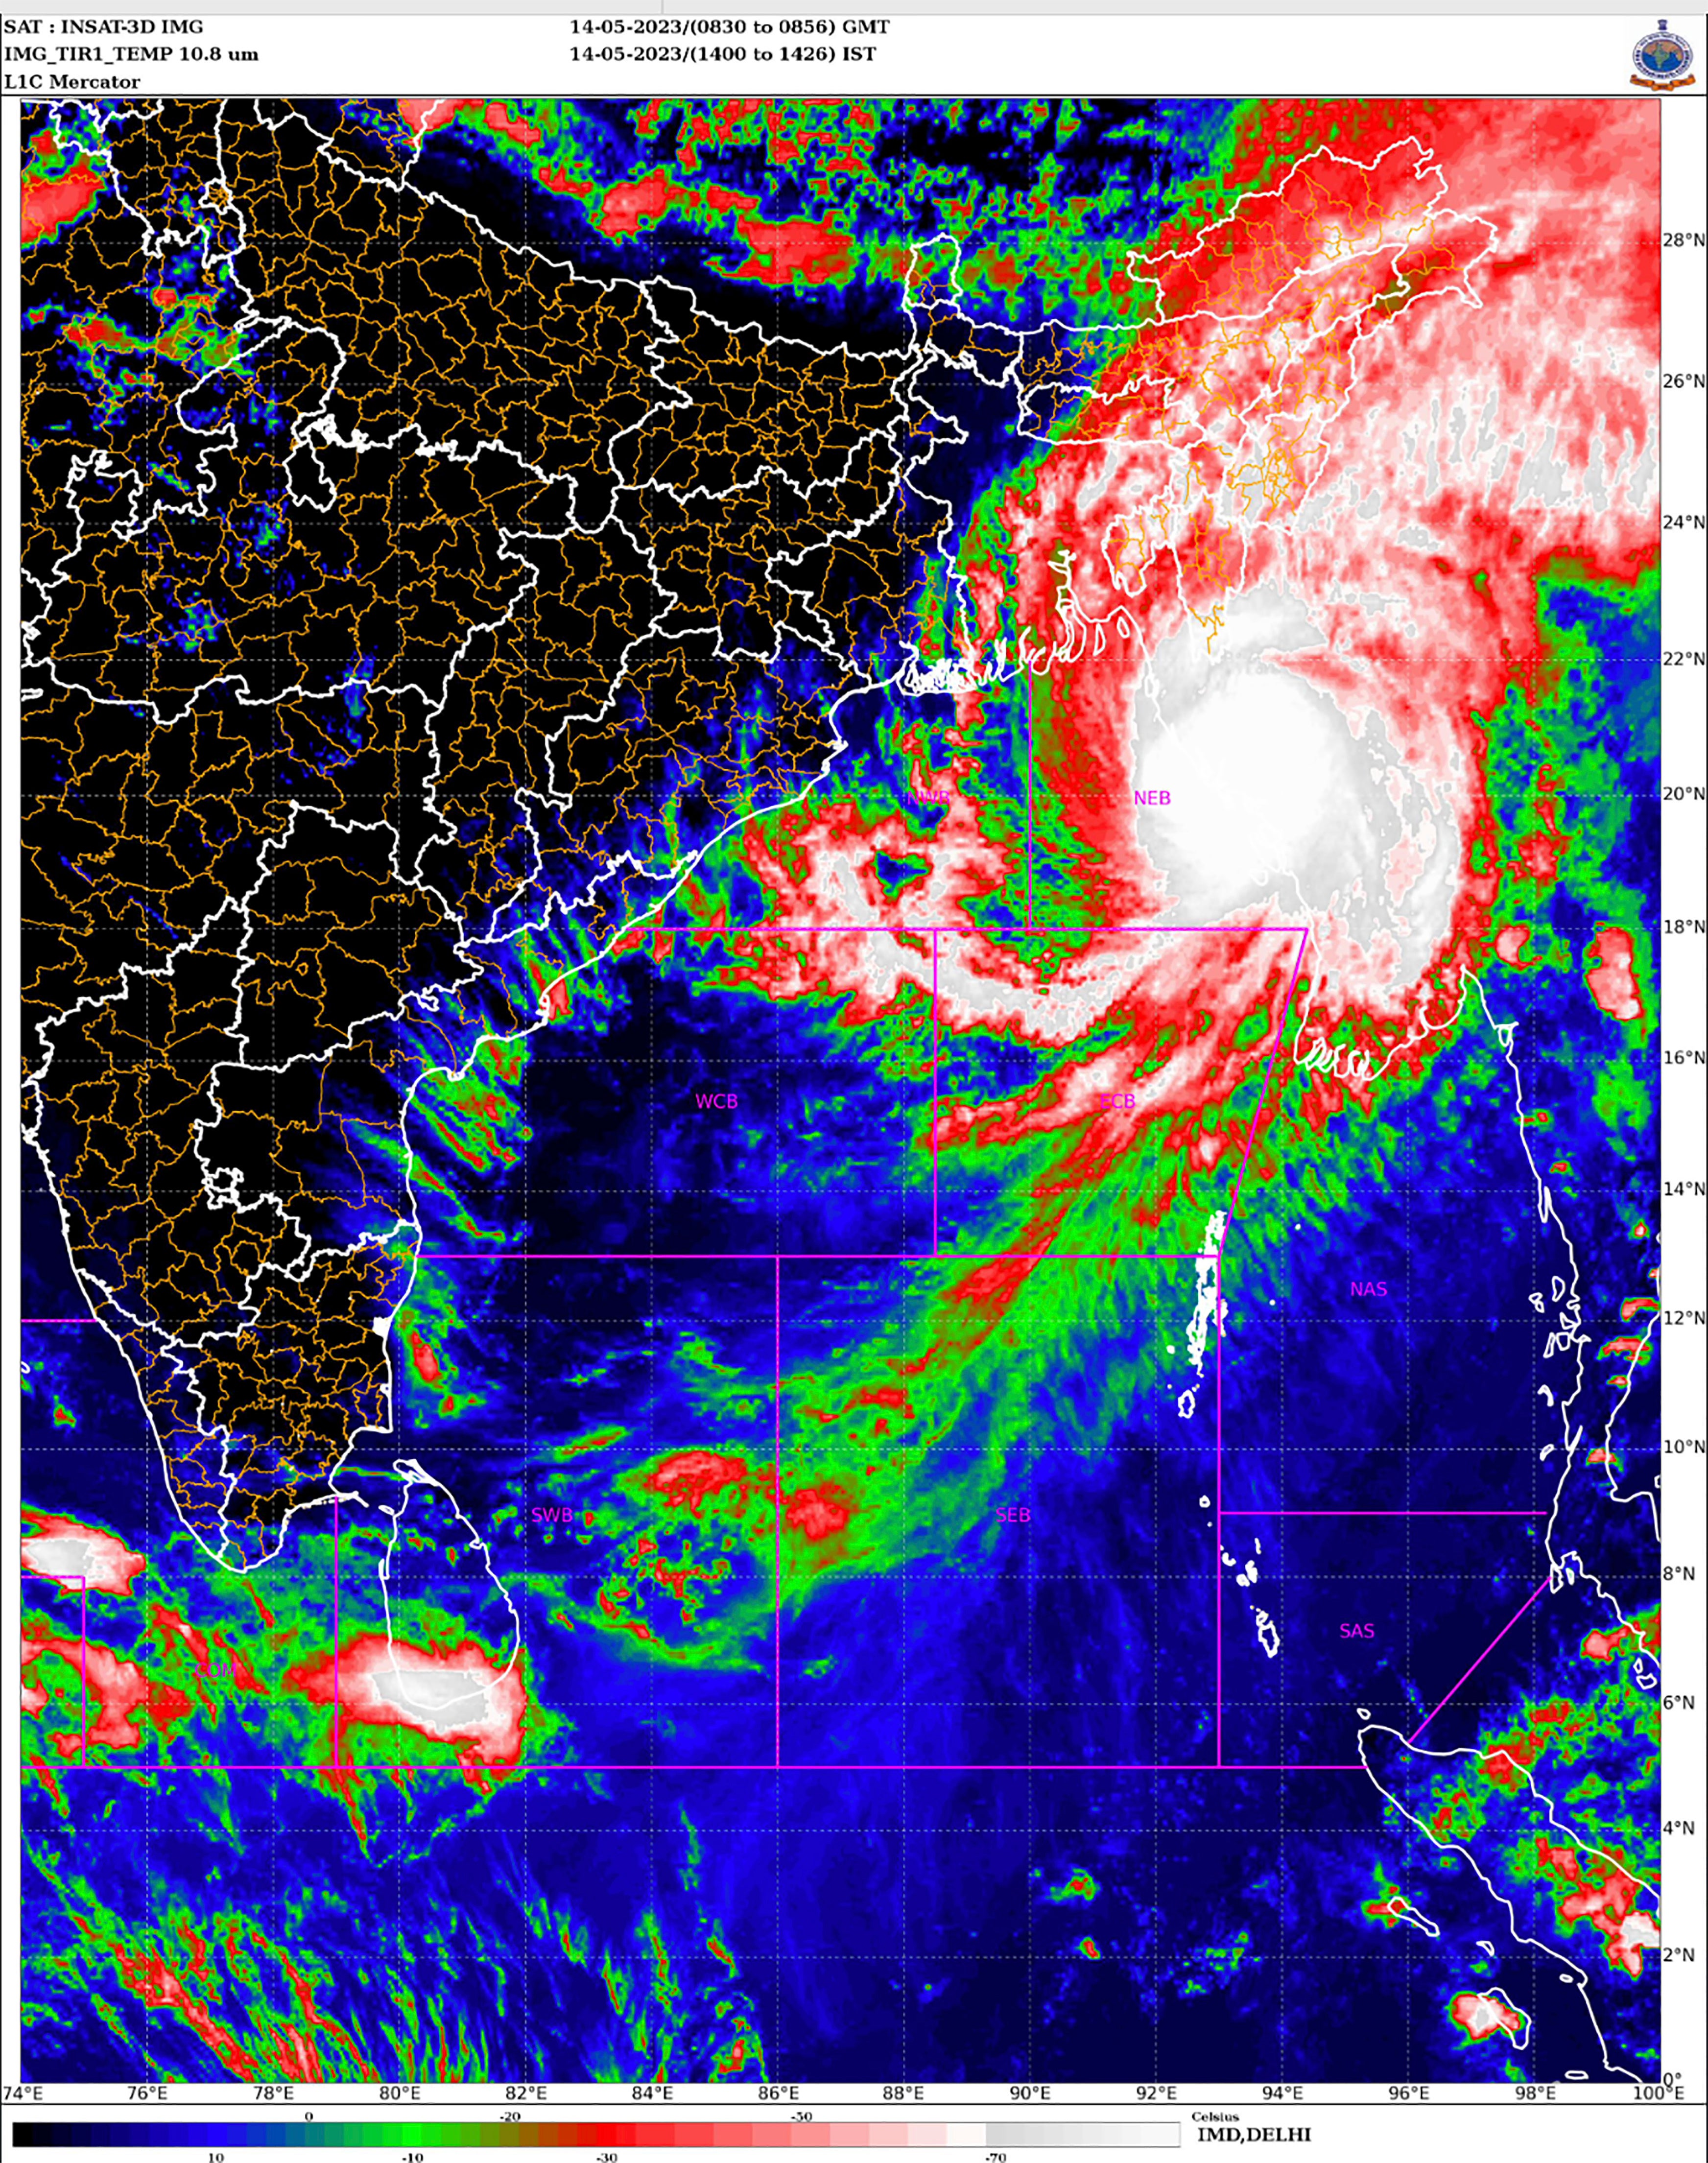 This satellite image provided by India Meteorological Department shows storm Mocha intensify into a severe cyclonic storm